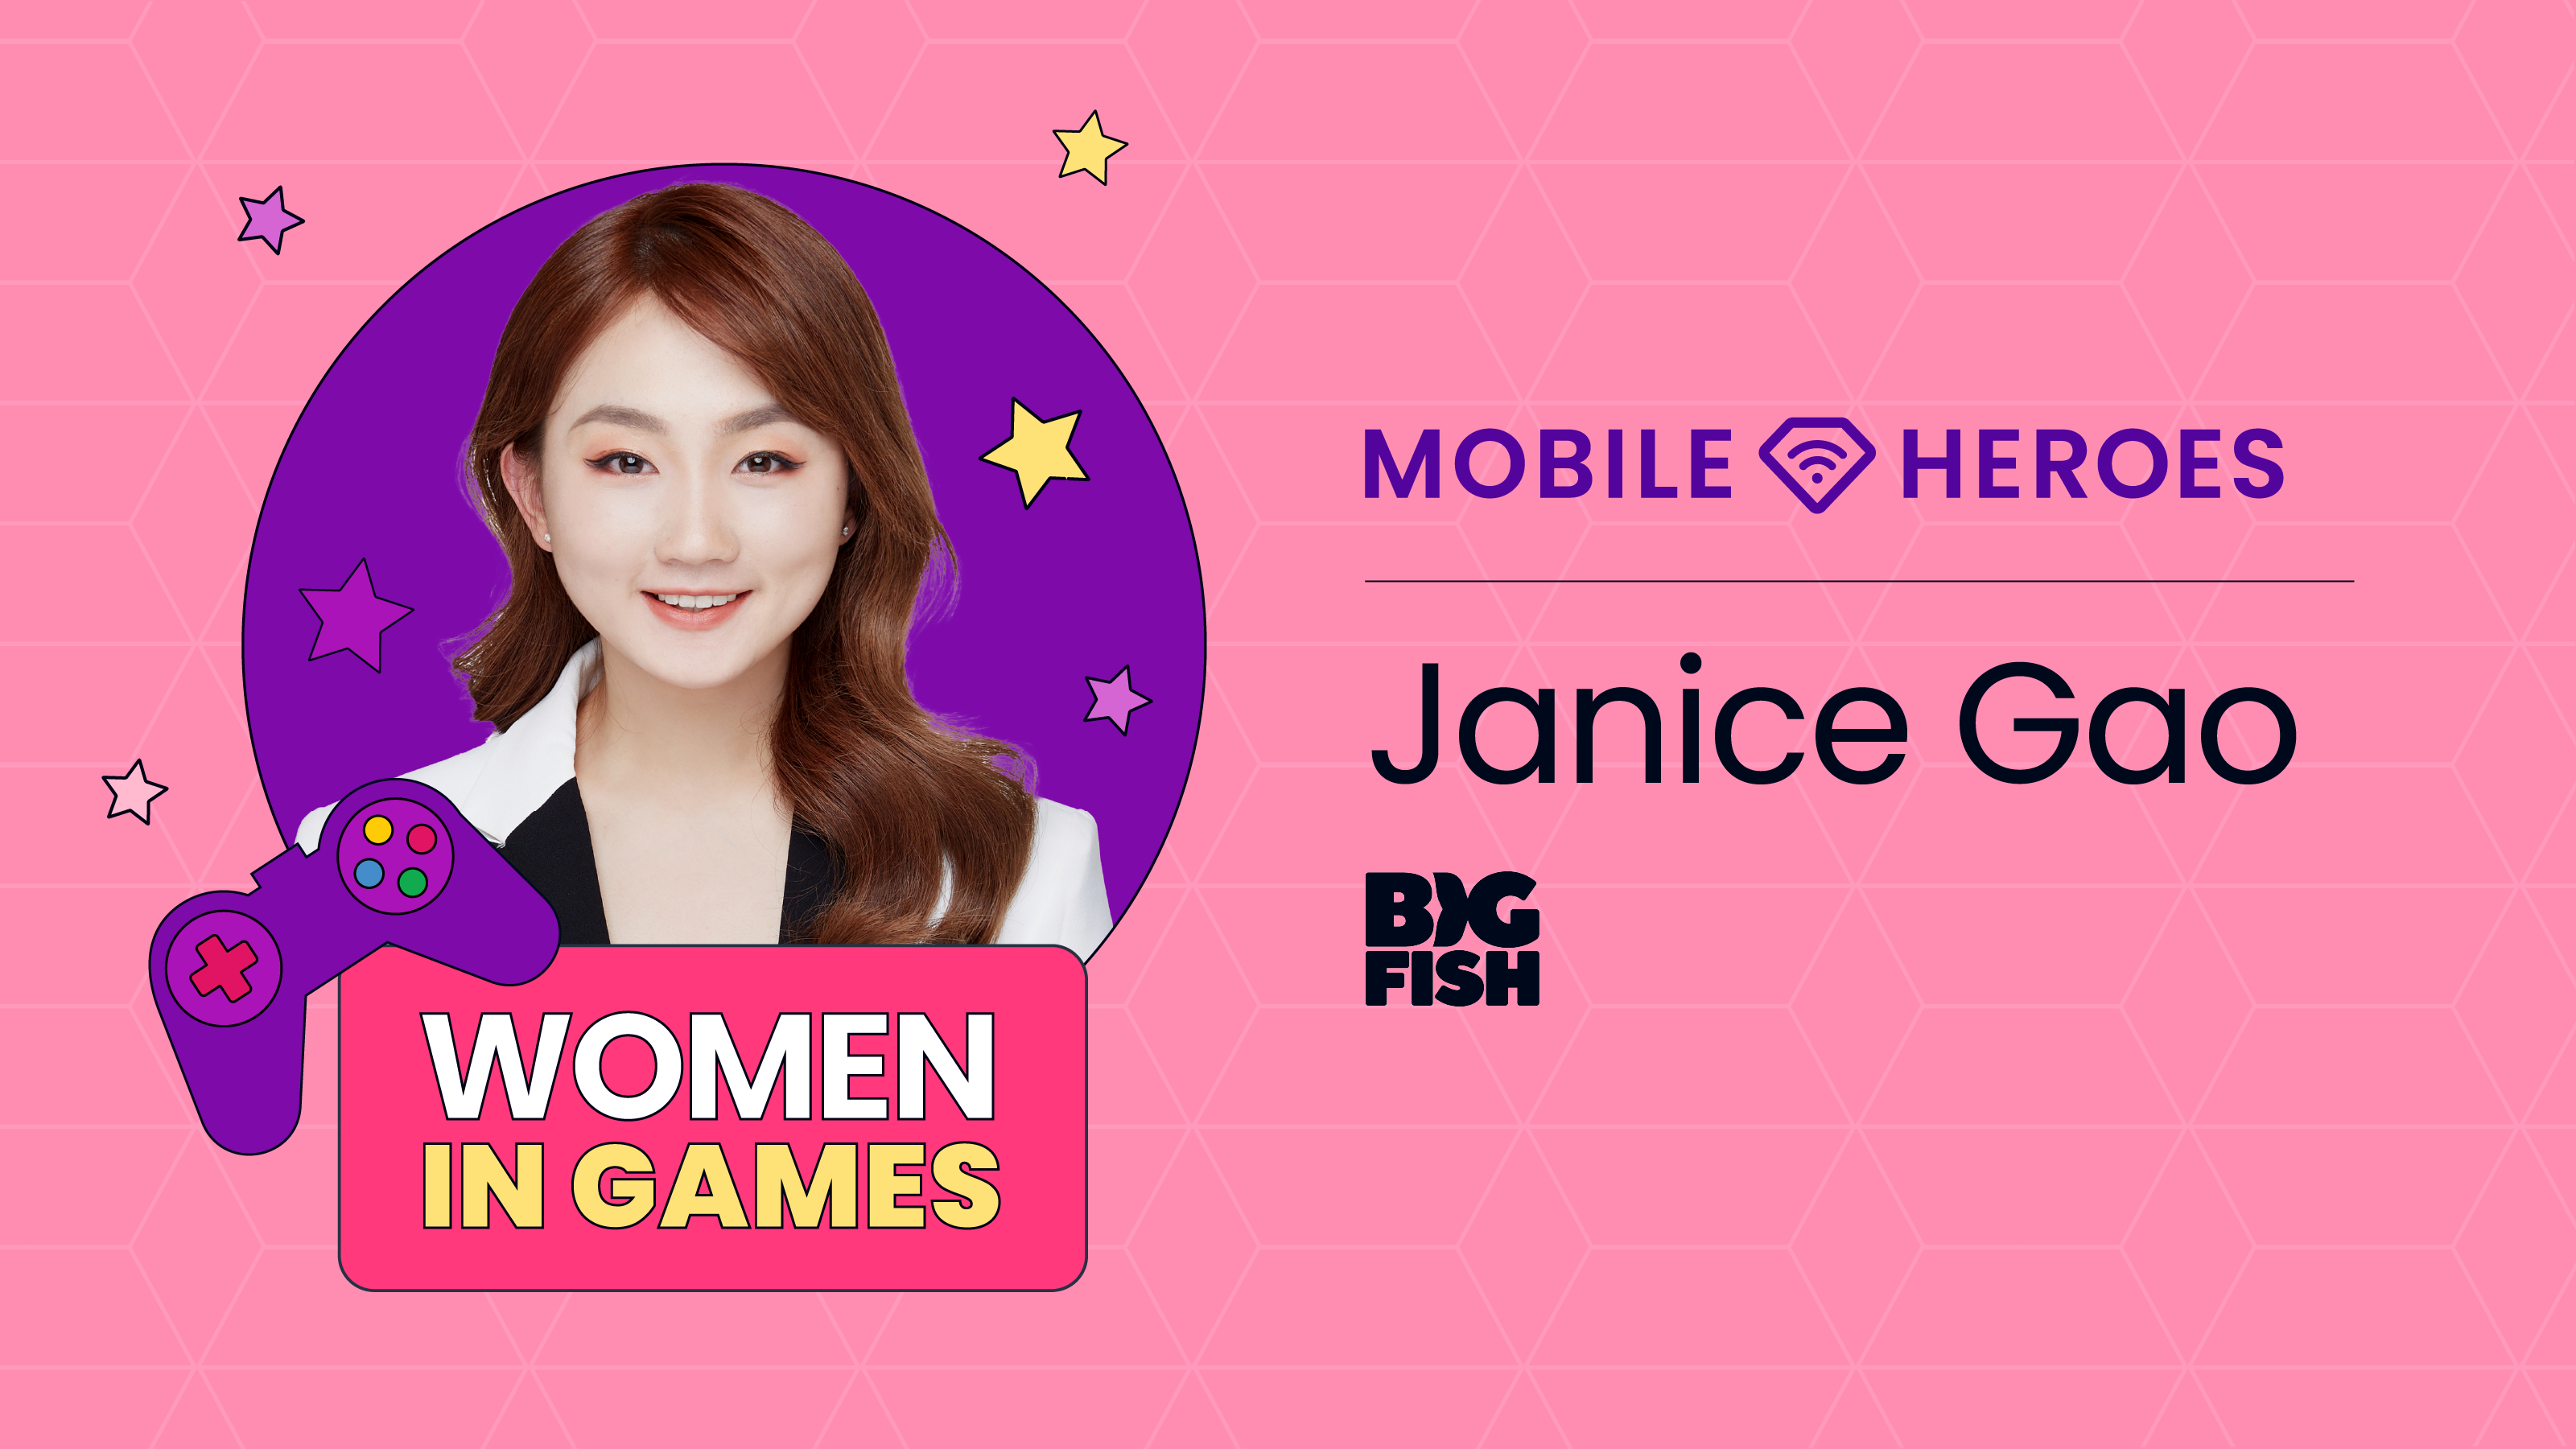 Big Fish Games’ Janice Gao on how keeping an open mind helped build up her mobile marketing skillset